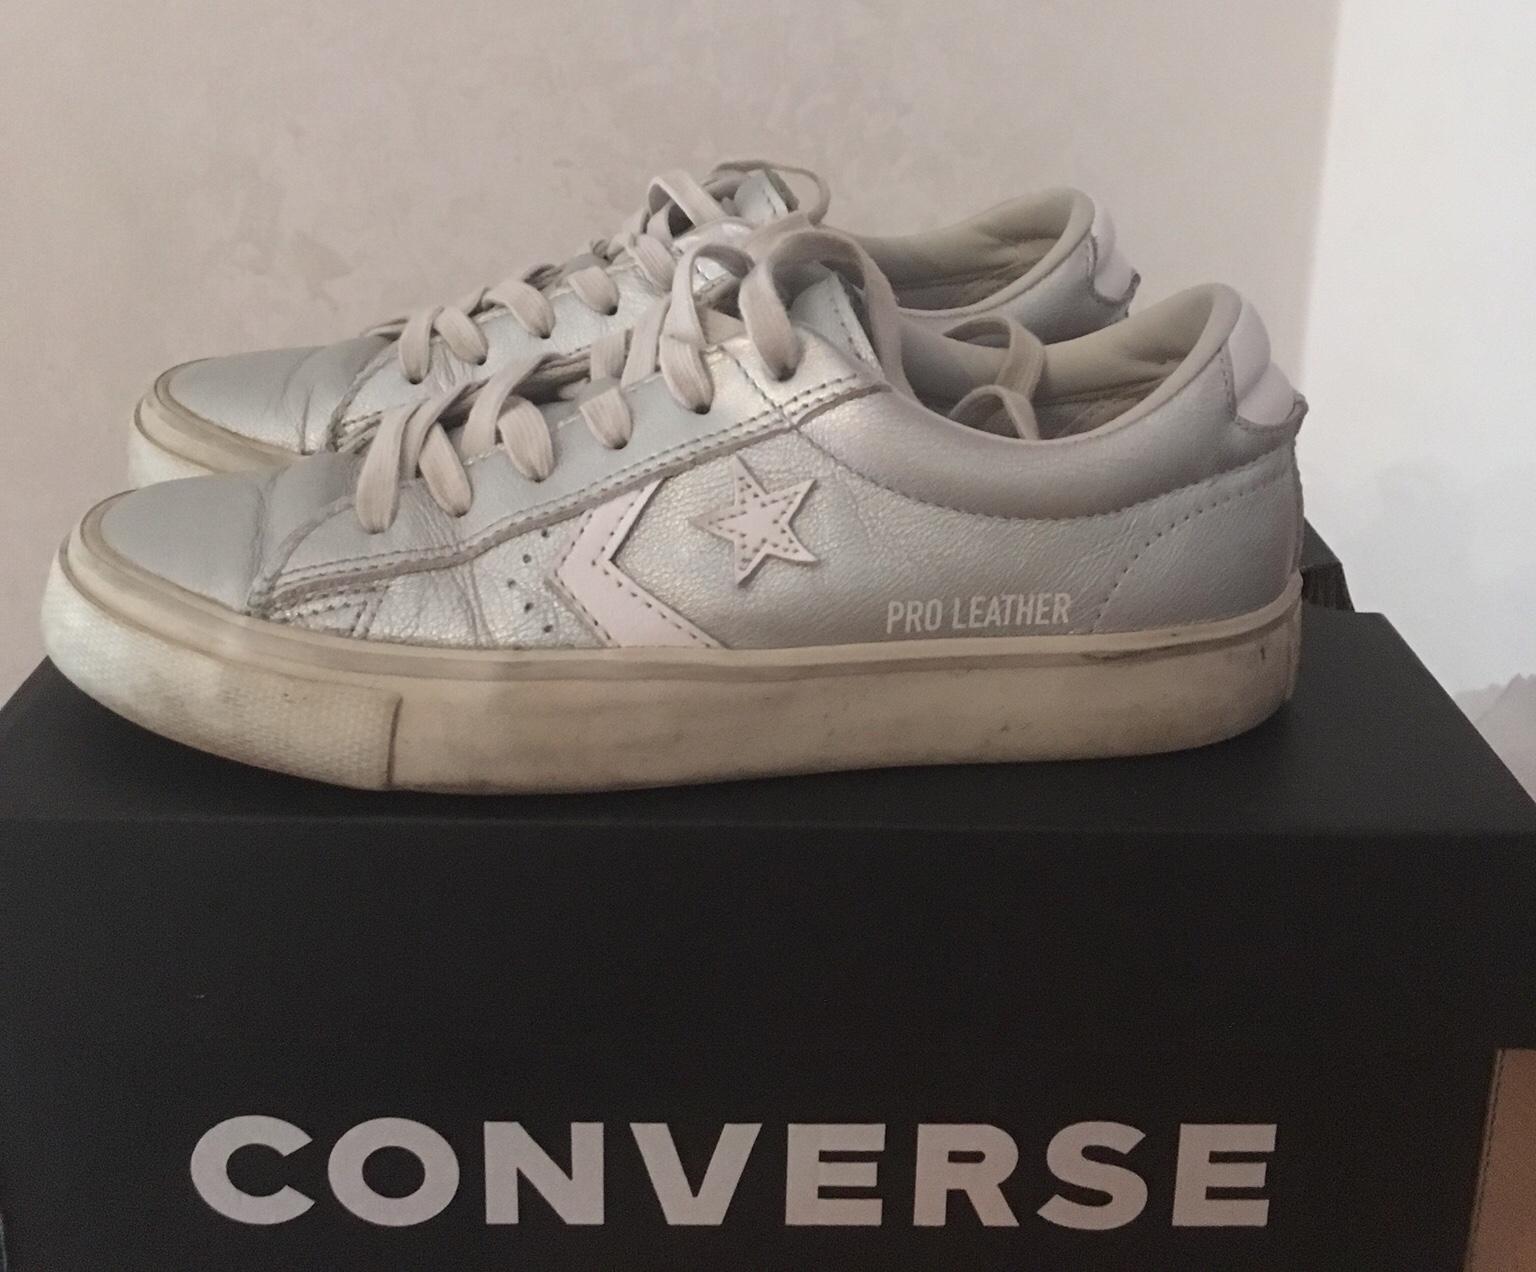 Converse pro leather in 70131 Bari for €60.00 for sale | Shpock